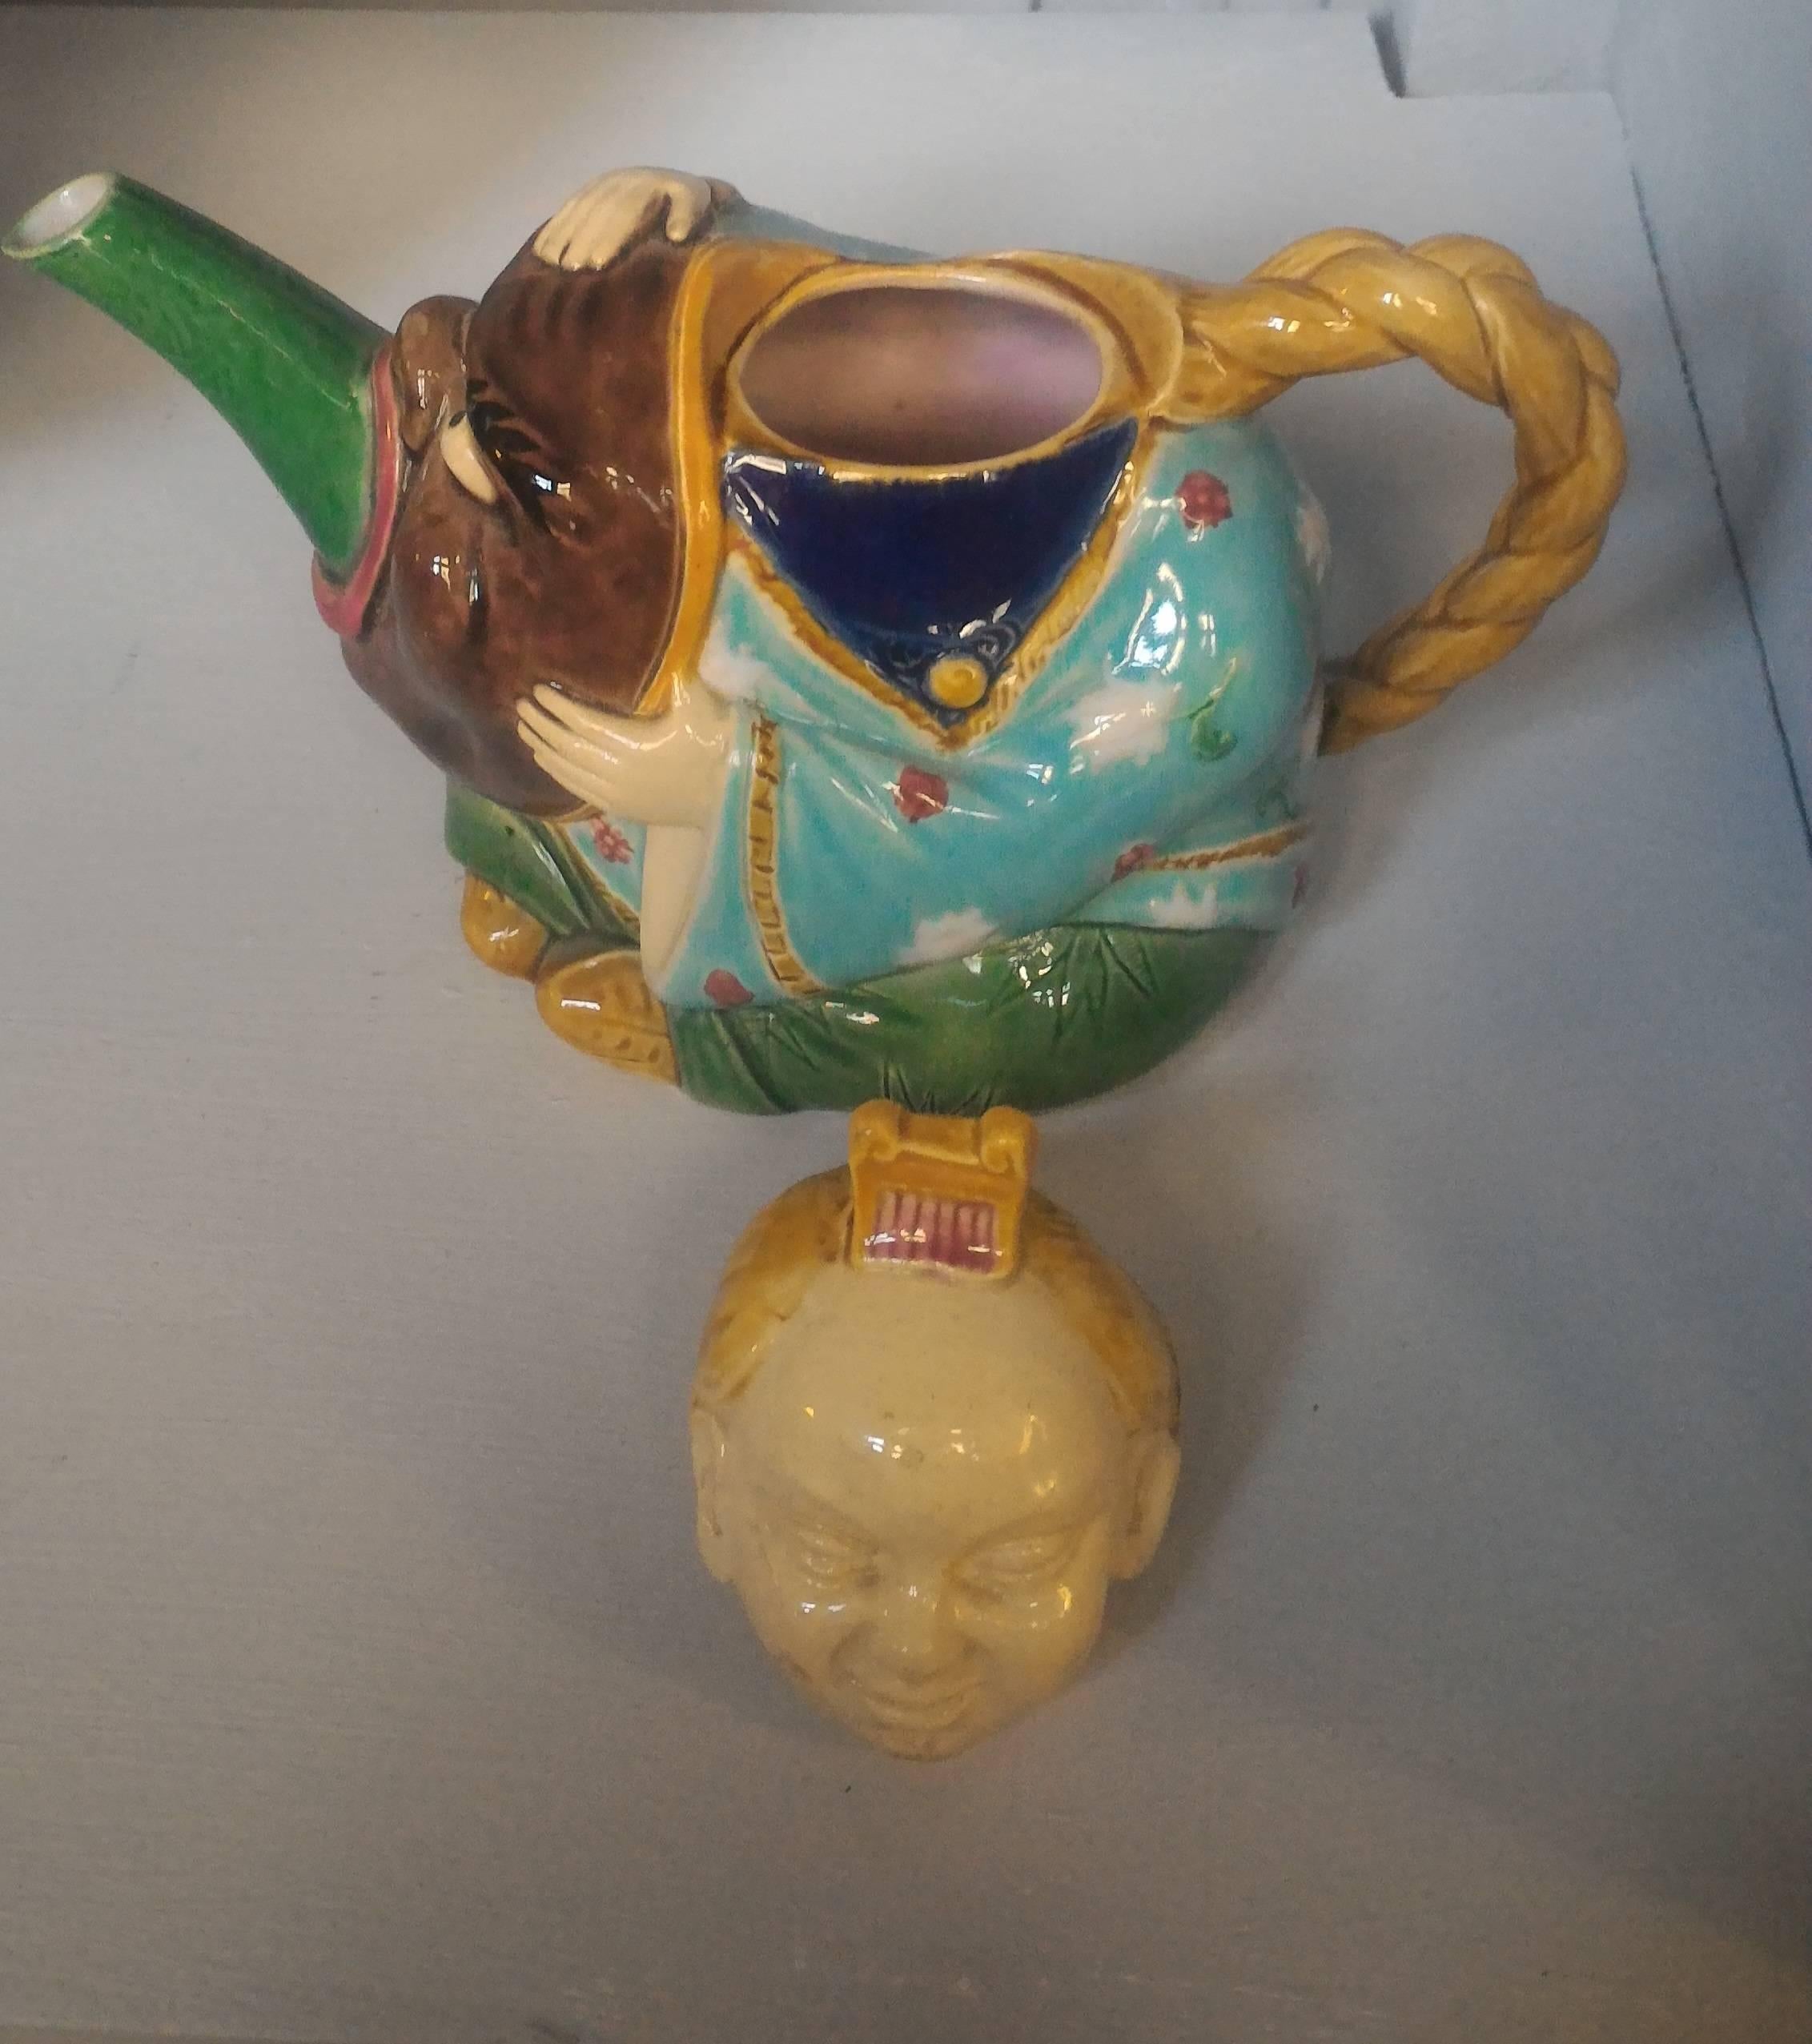 This charming little teapot realized by the famous manufactory of Minton in England, reflects all the influence of Orient on Decorative Arts of the second half the 19th Century. It can be seen a Chinese man in traditional costume, holding a mask in